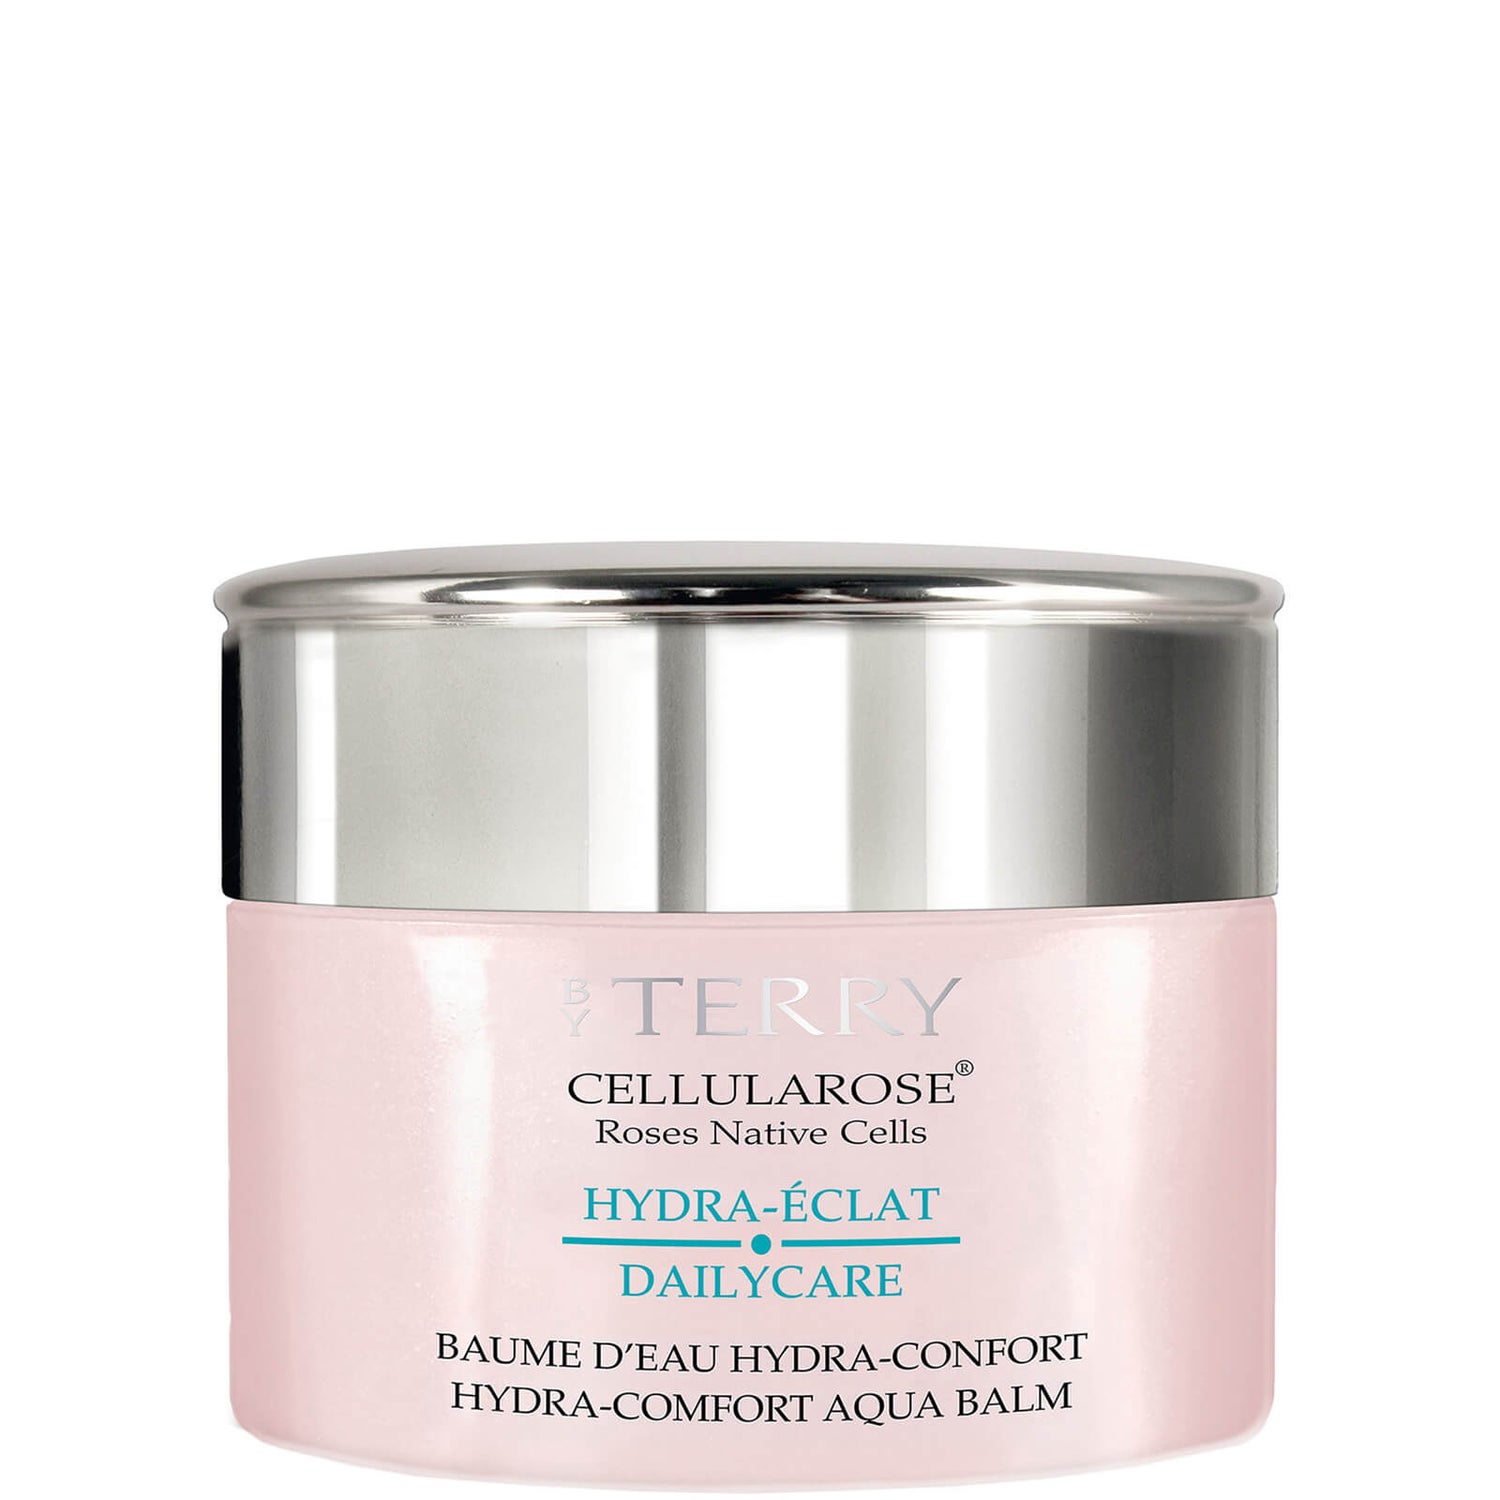 Baume d’Eau Hydra-Confort Hydra-Éclat Dailycare Cellularose® By Terry 30 g